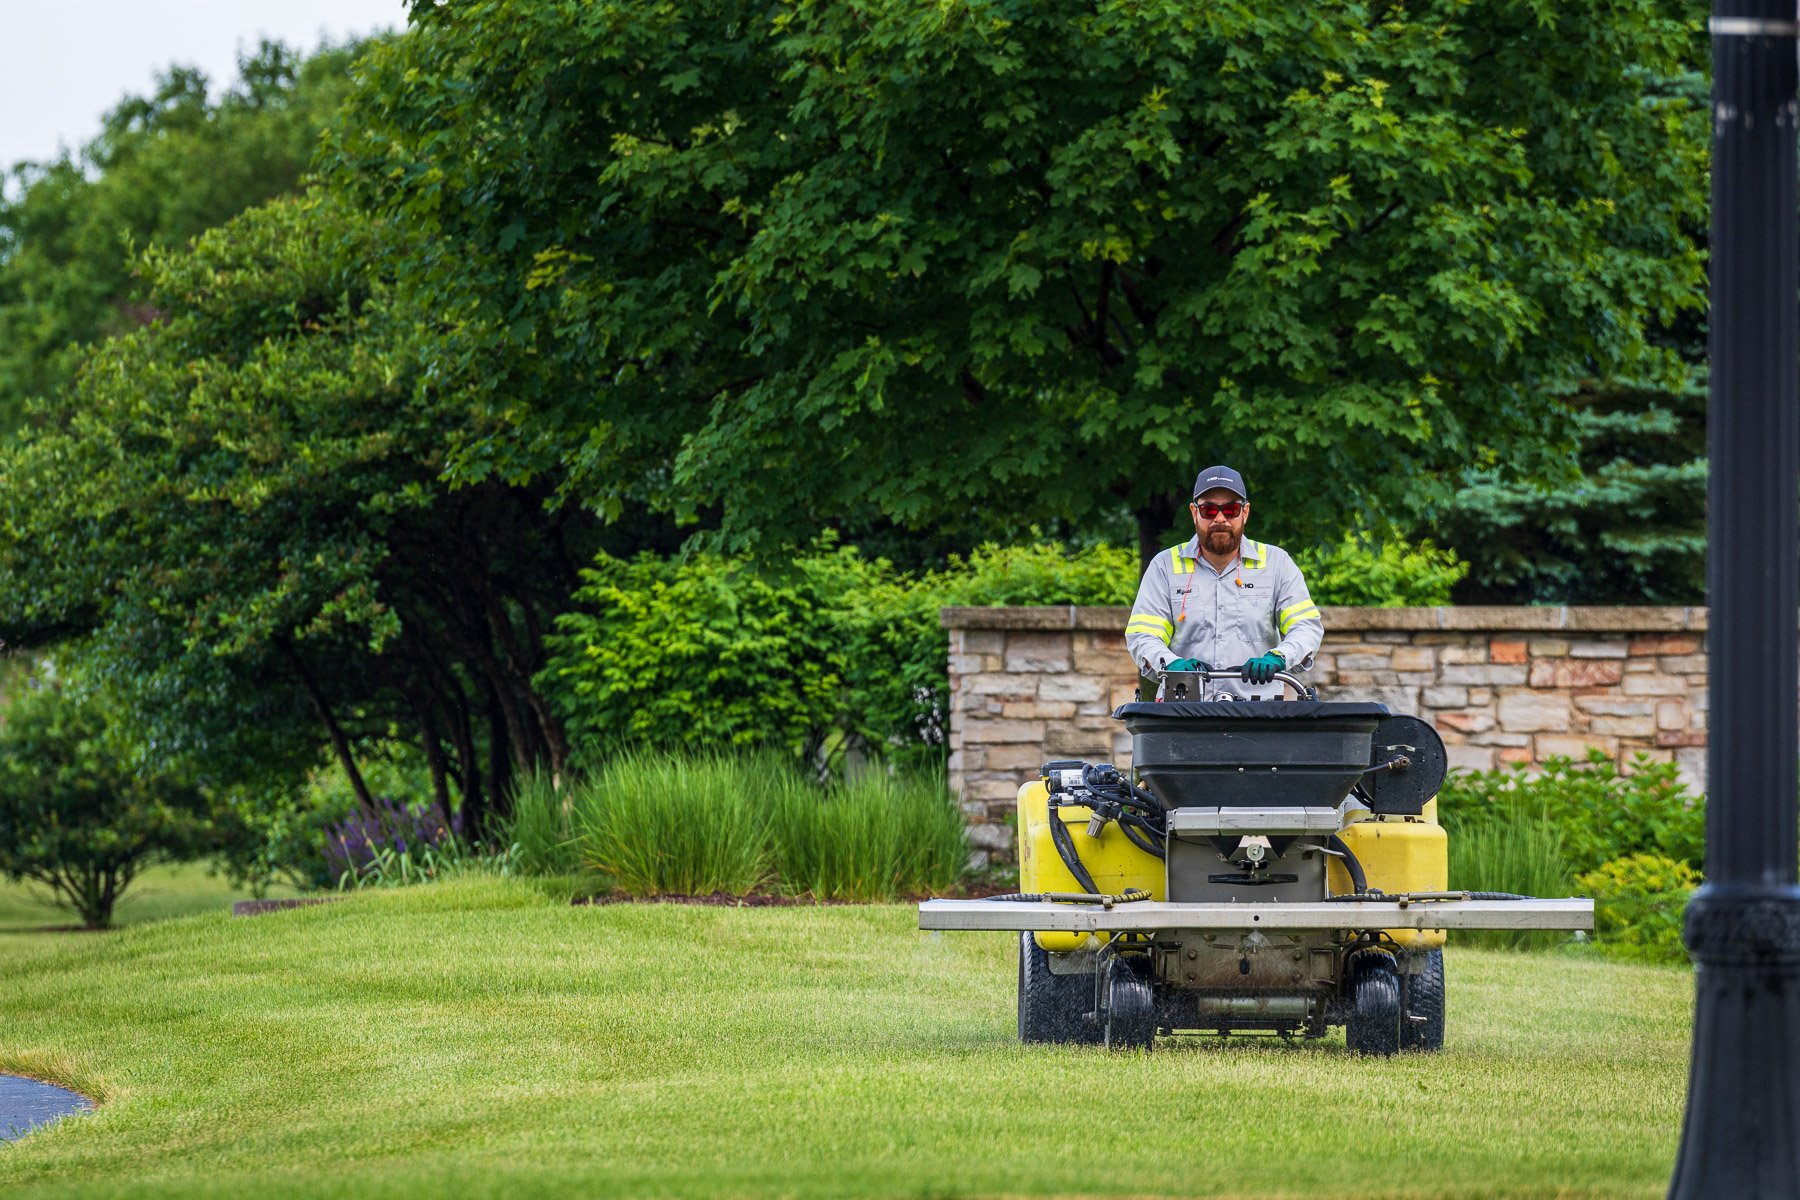 commercial lawn care technician spraying a lawn